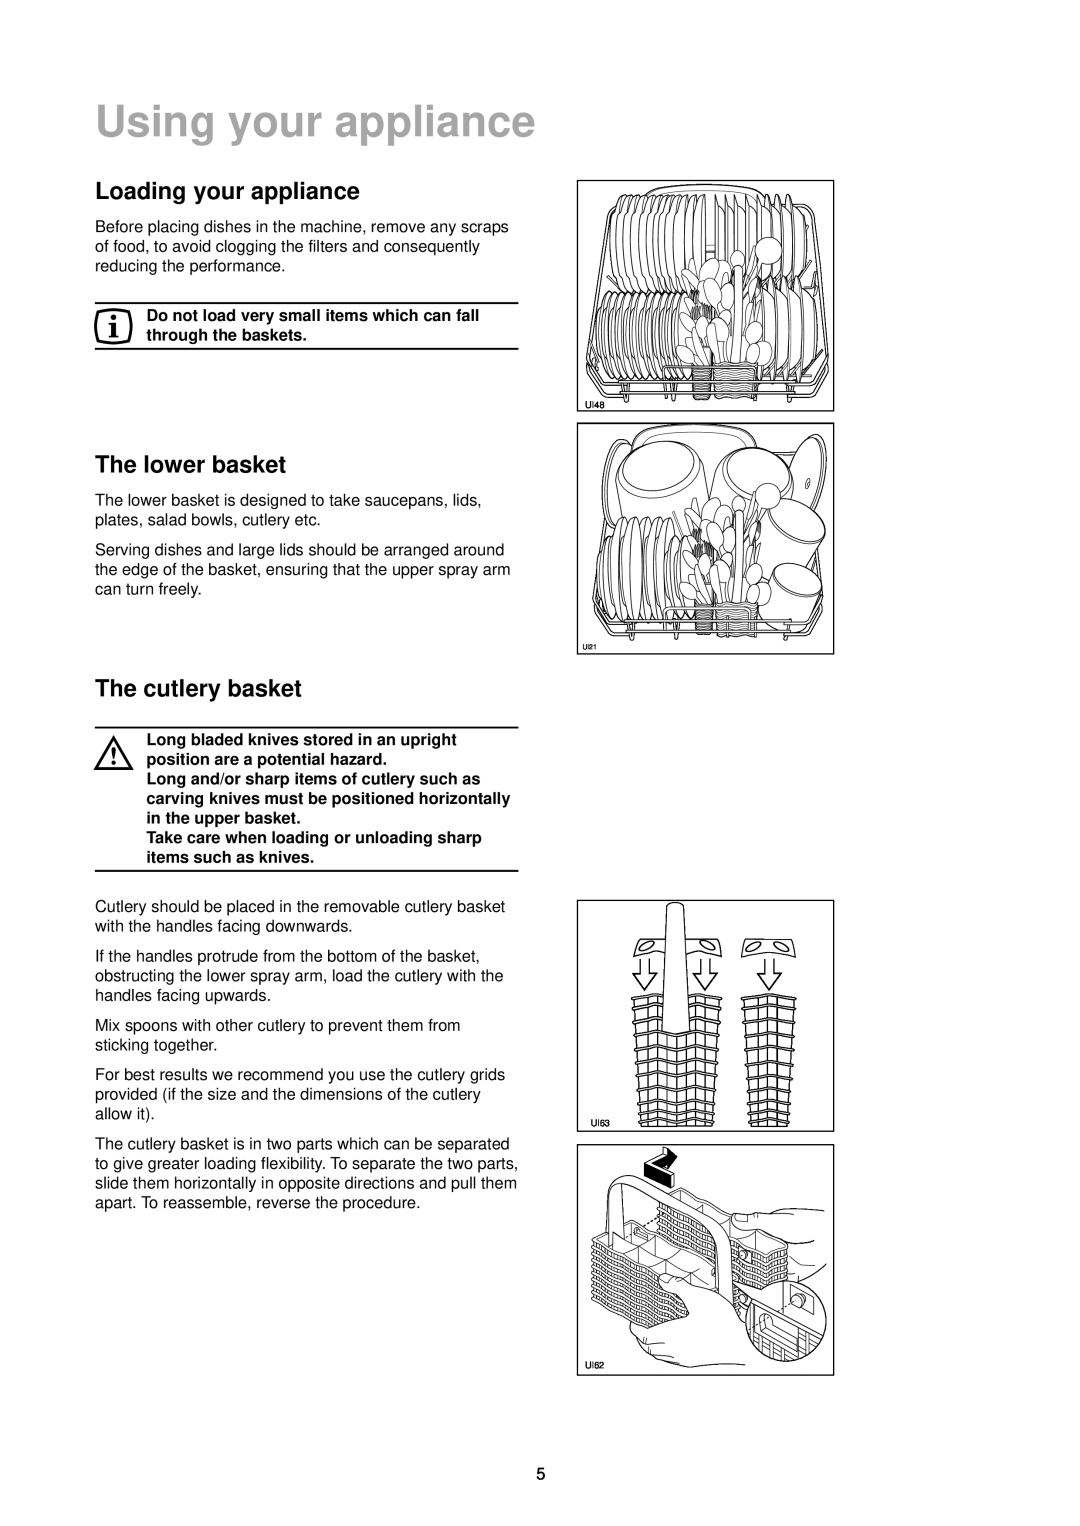 Zanussi DA 6152 manual Using your appliance, Loading your appliance, The lower basket, The cutlery basket 